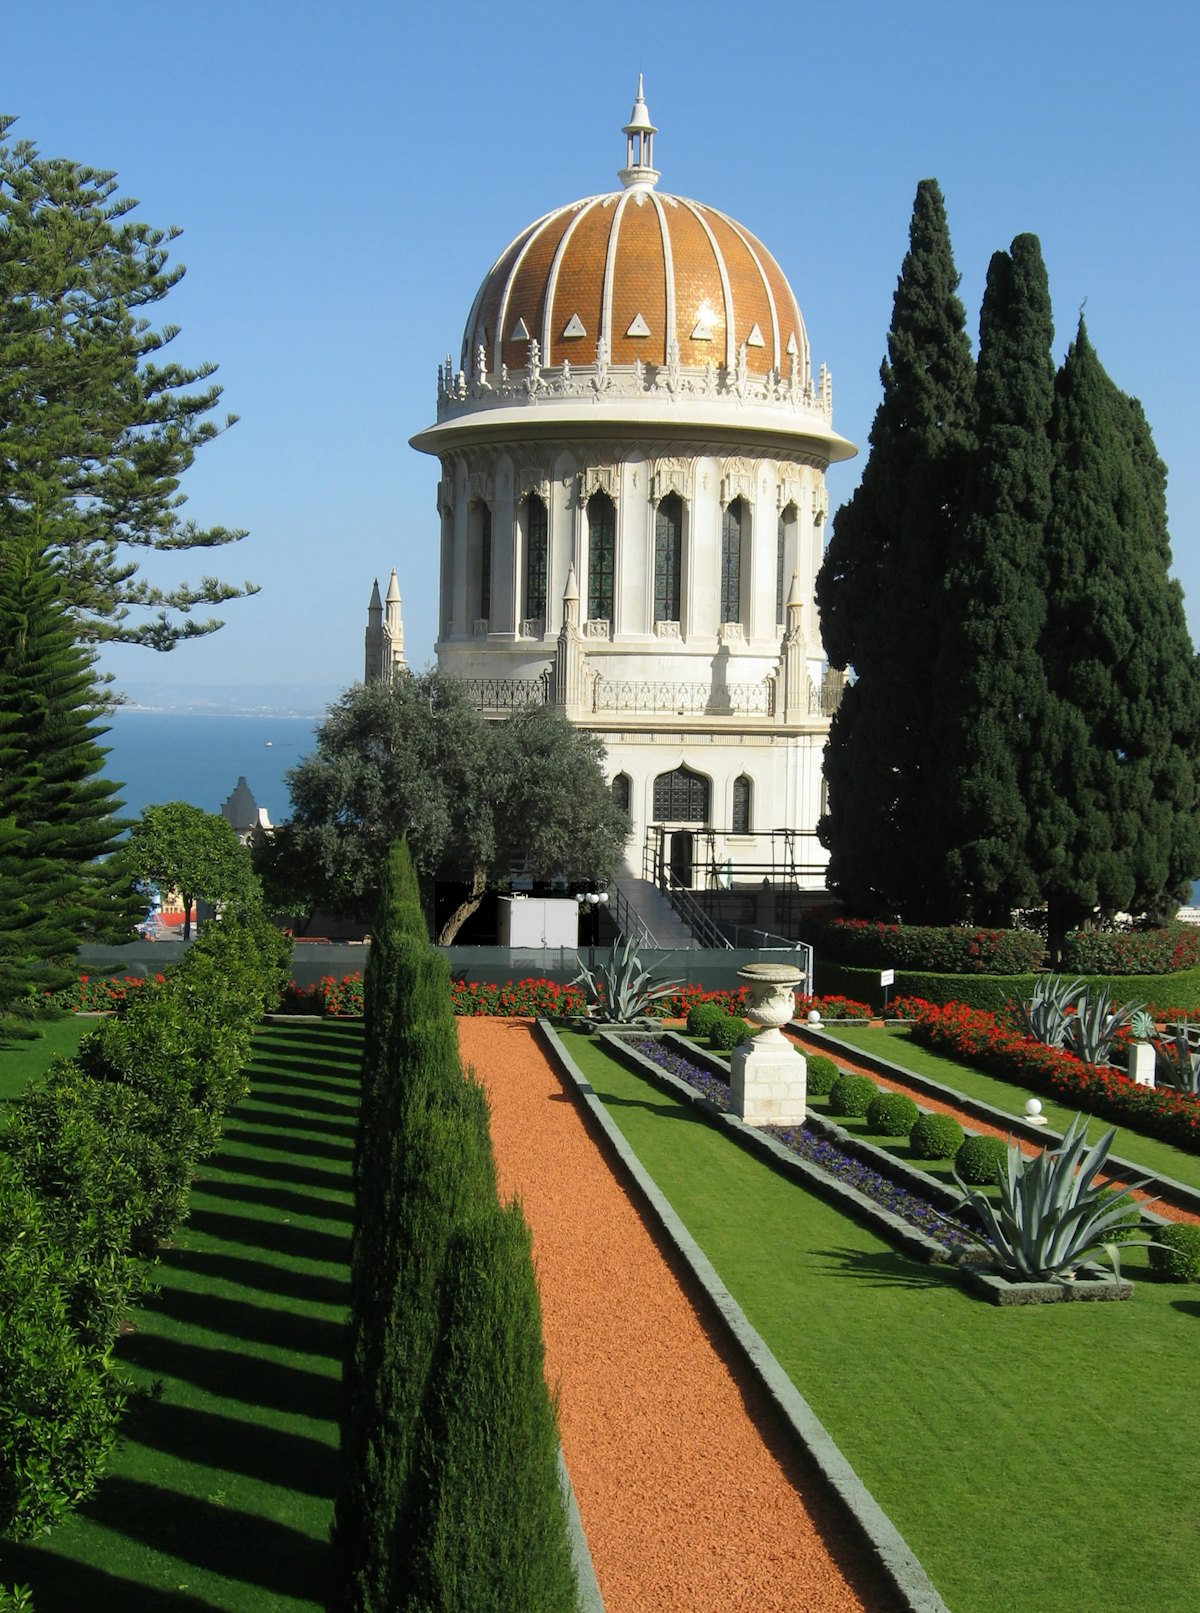 The Shrine of the Bab in Haifa, one of the most visited sites in Israel, will undergo a four-year restoration project. Major work begins in January.